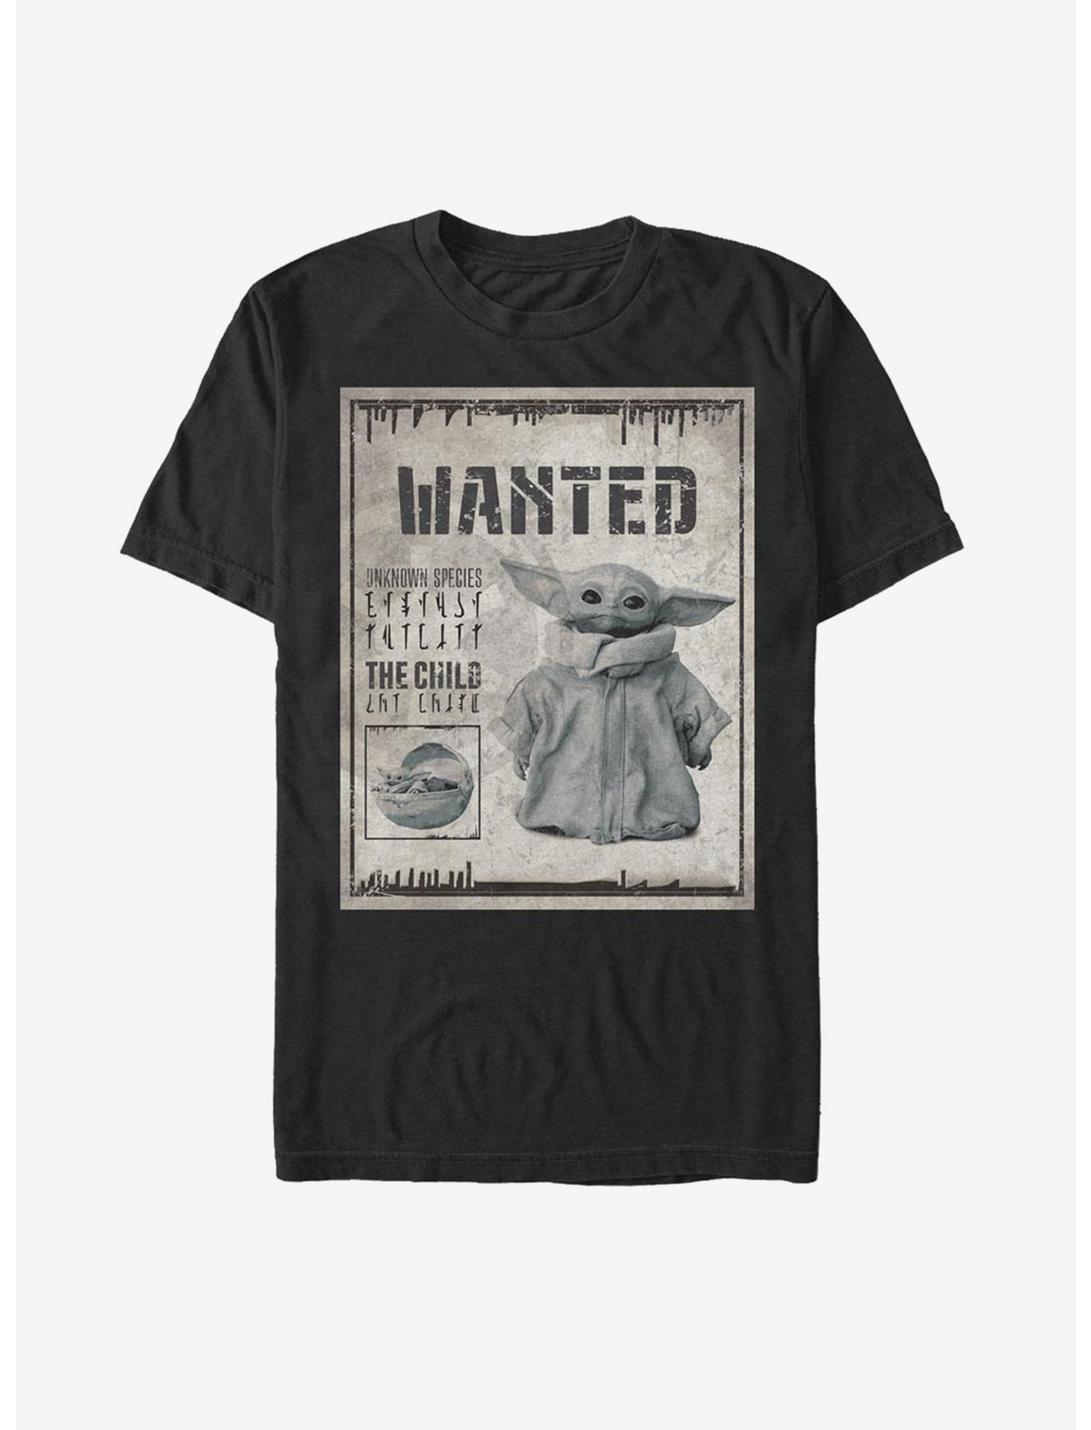 Star Wars The Mandalorian The Child Unknown Wanted Poster T-Shirt, BLACK, hi-res